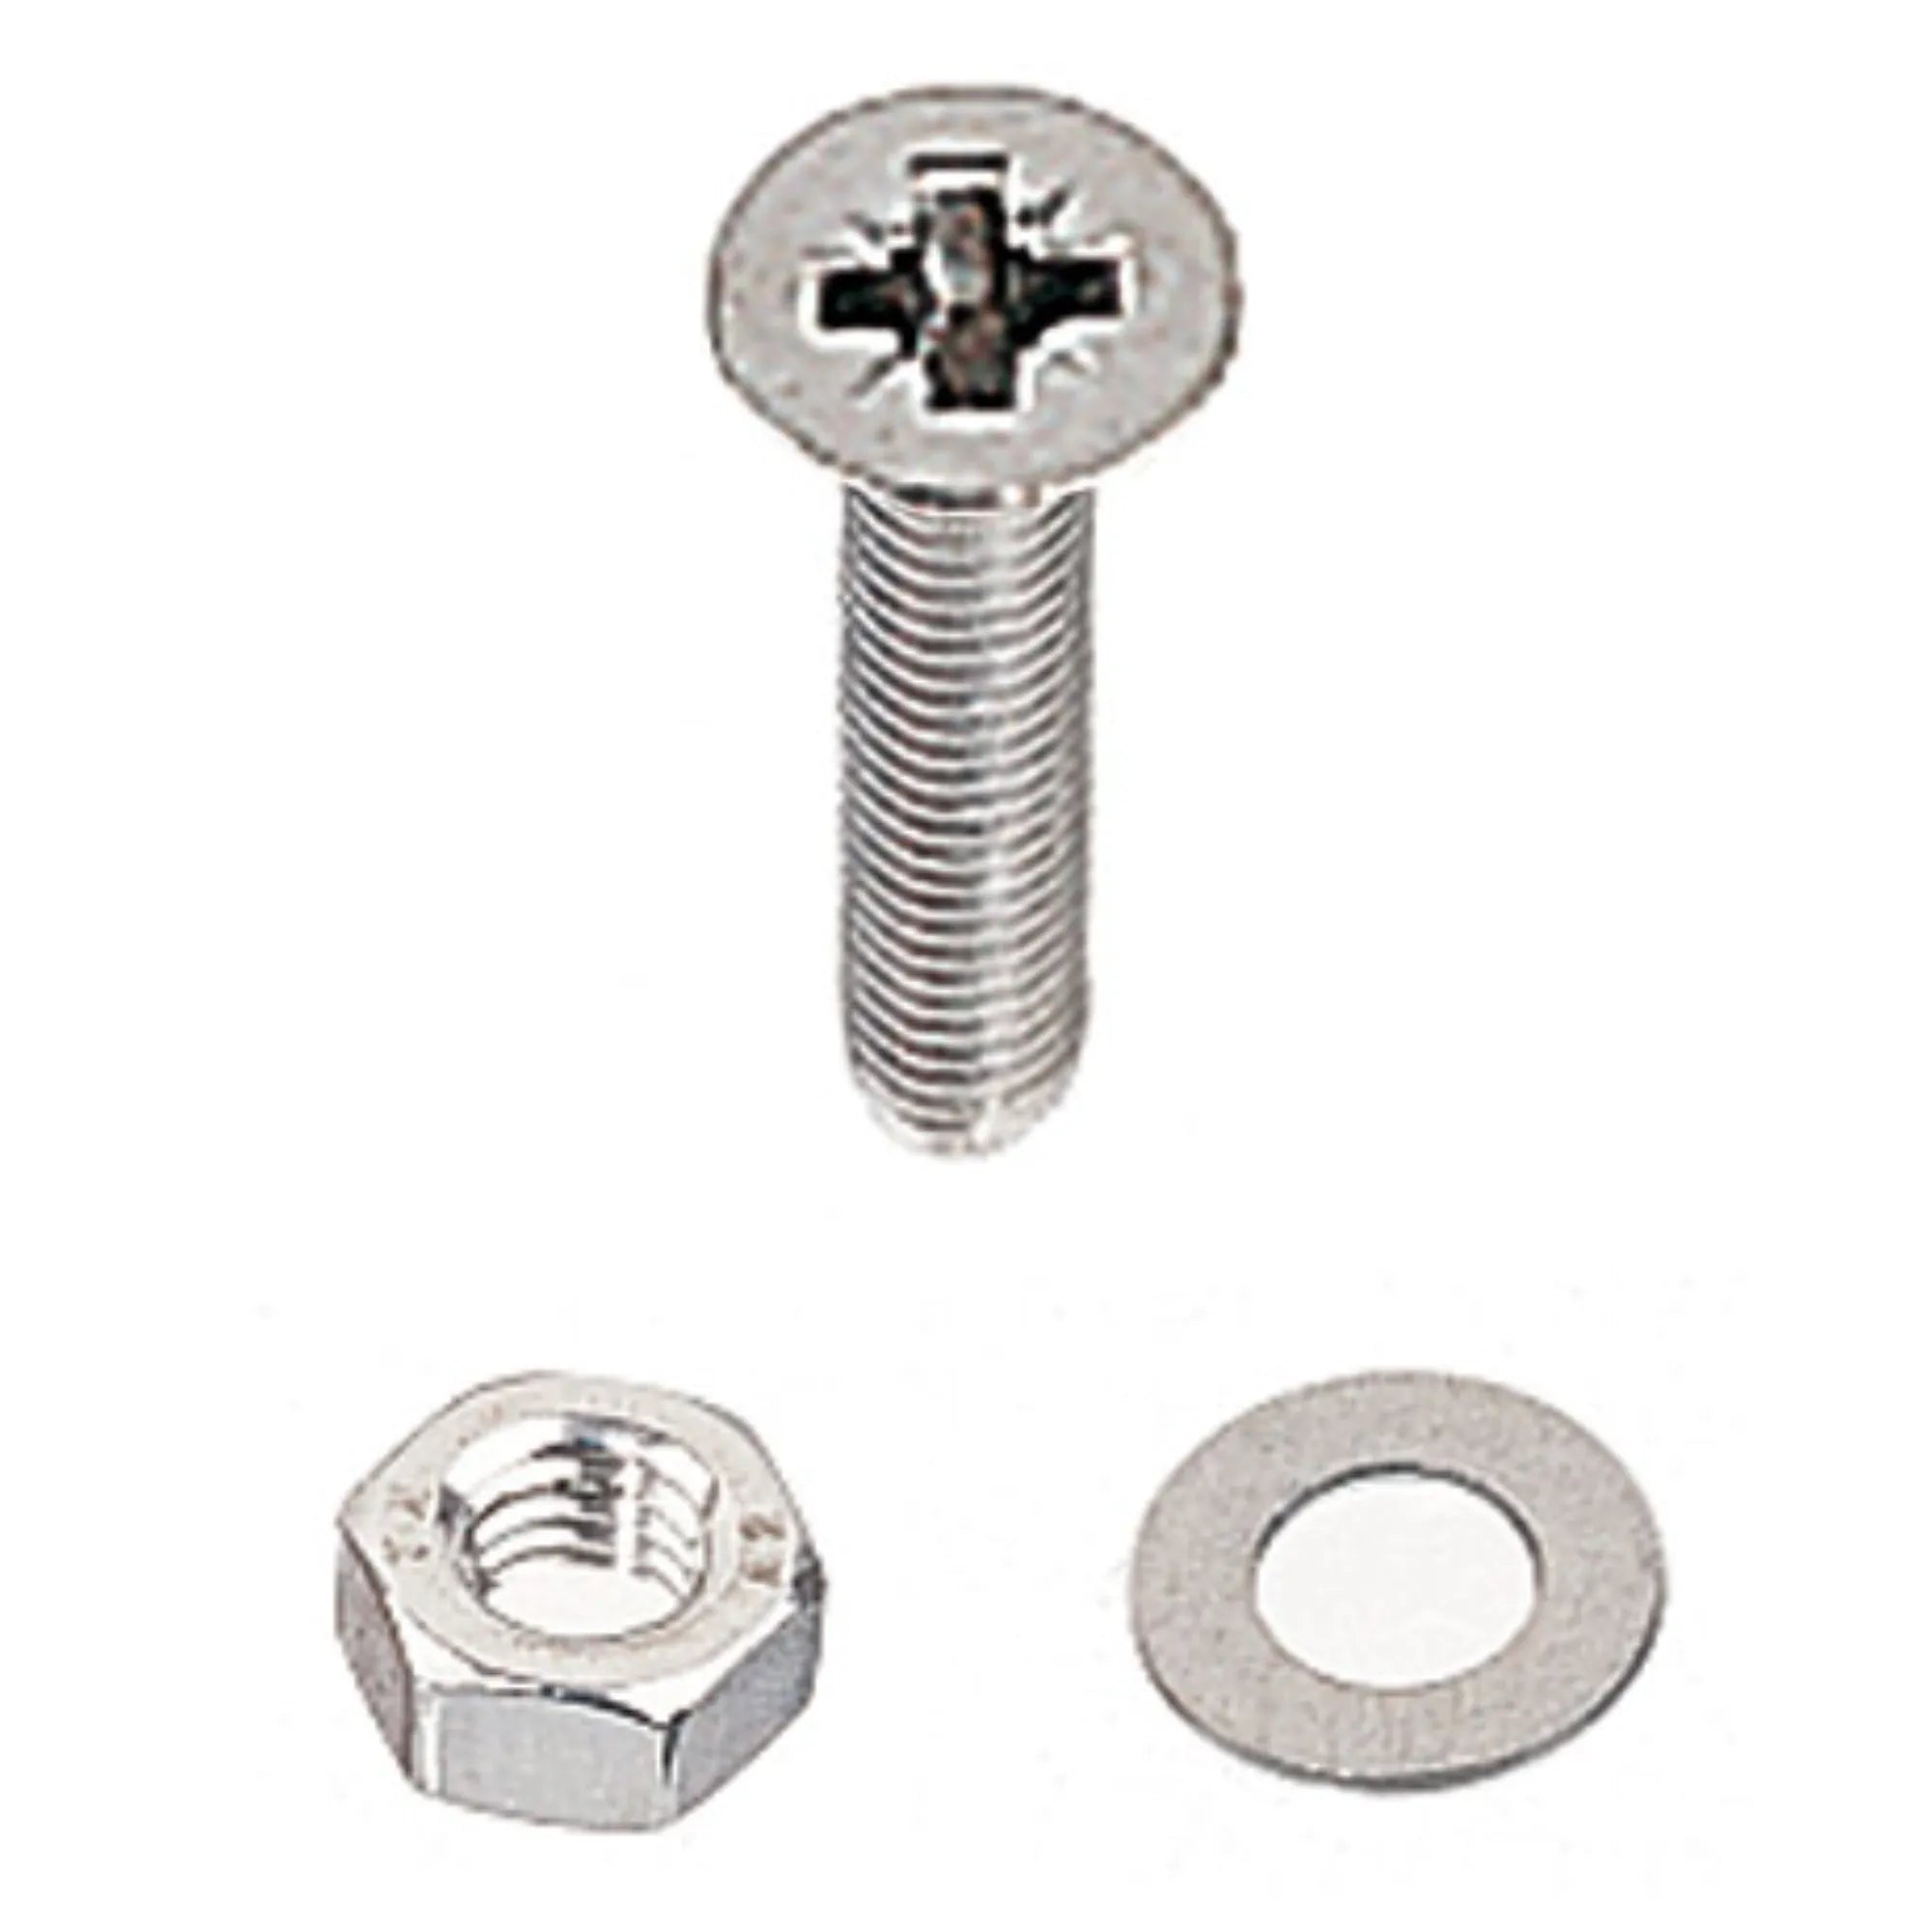 A4 Stainless Steel Countersunk Pozi Machine Screws